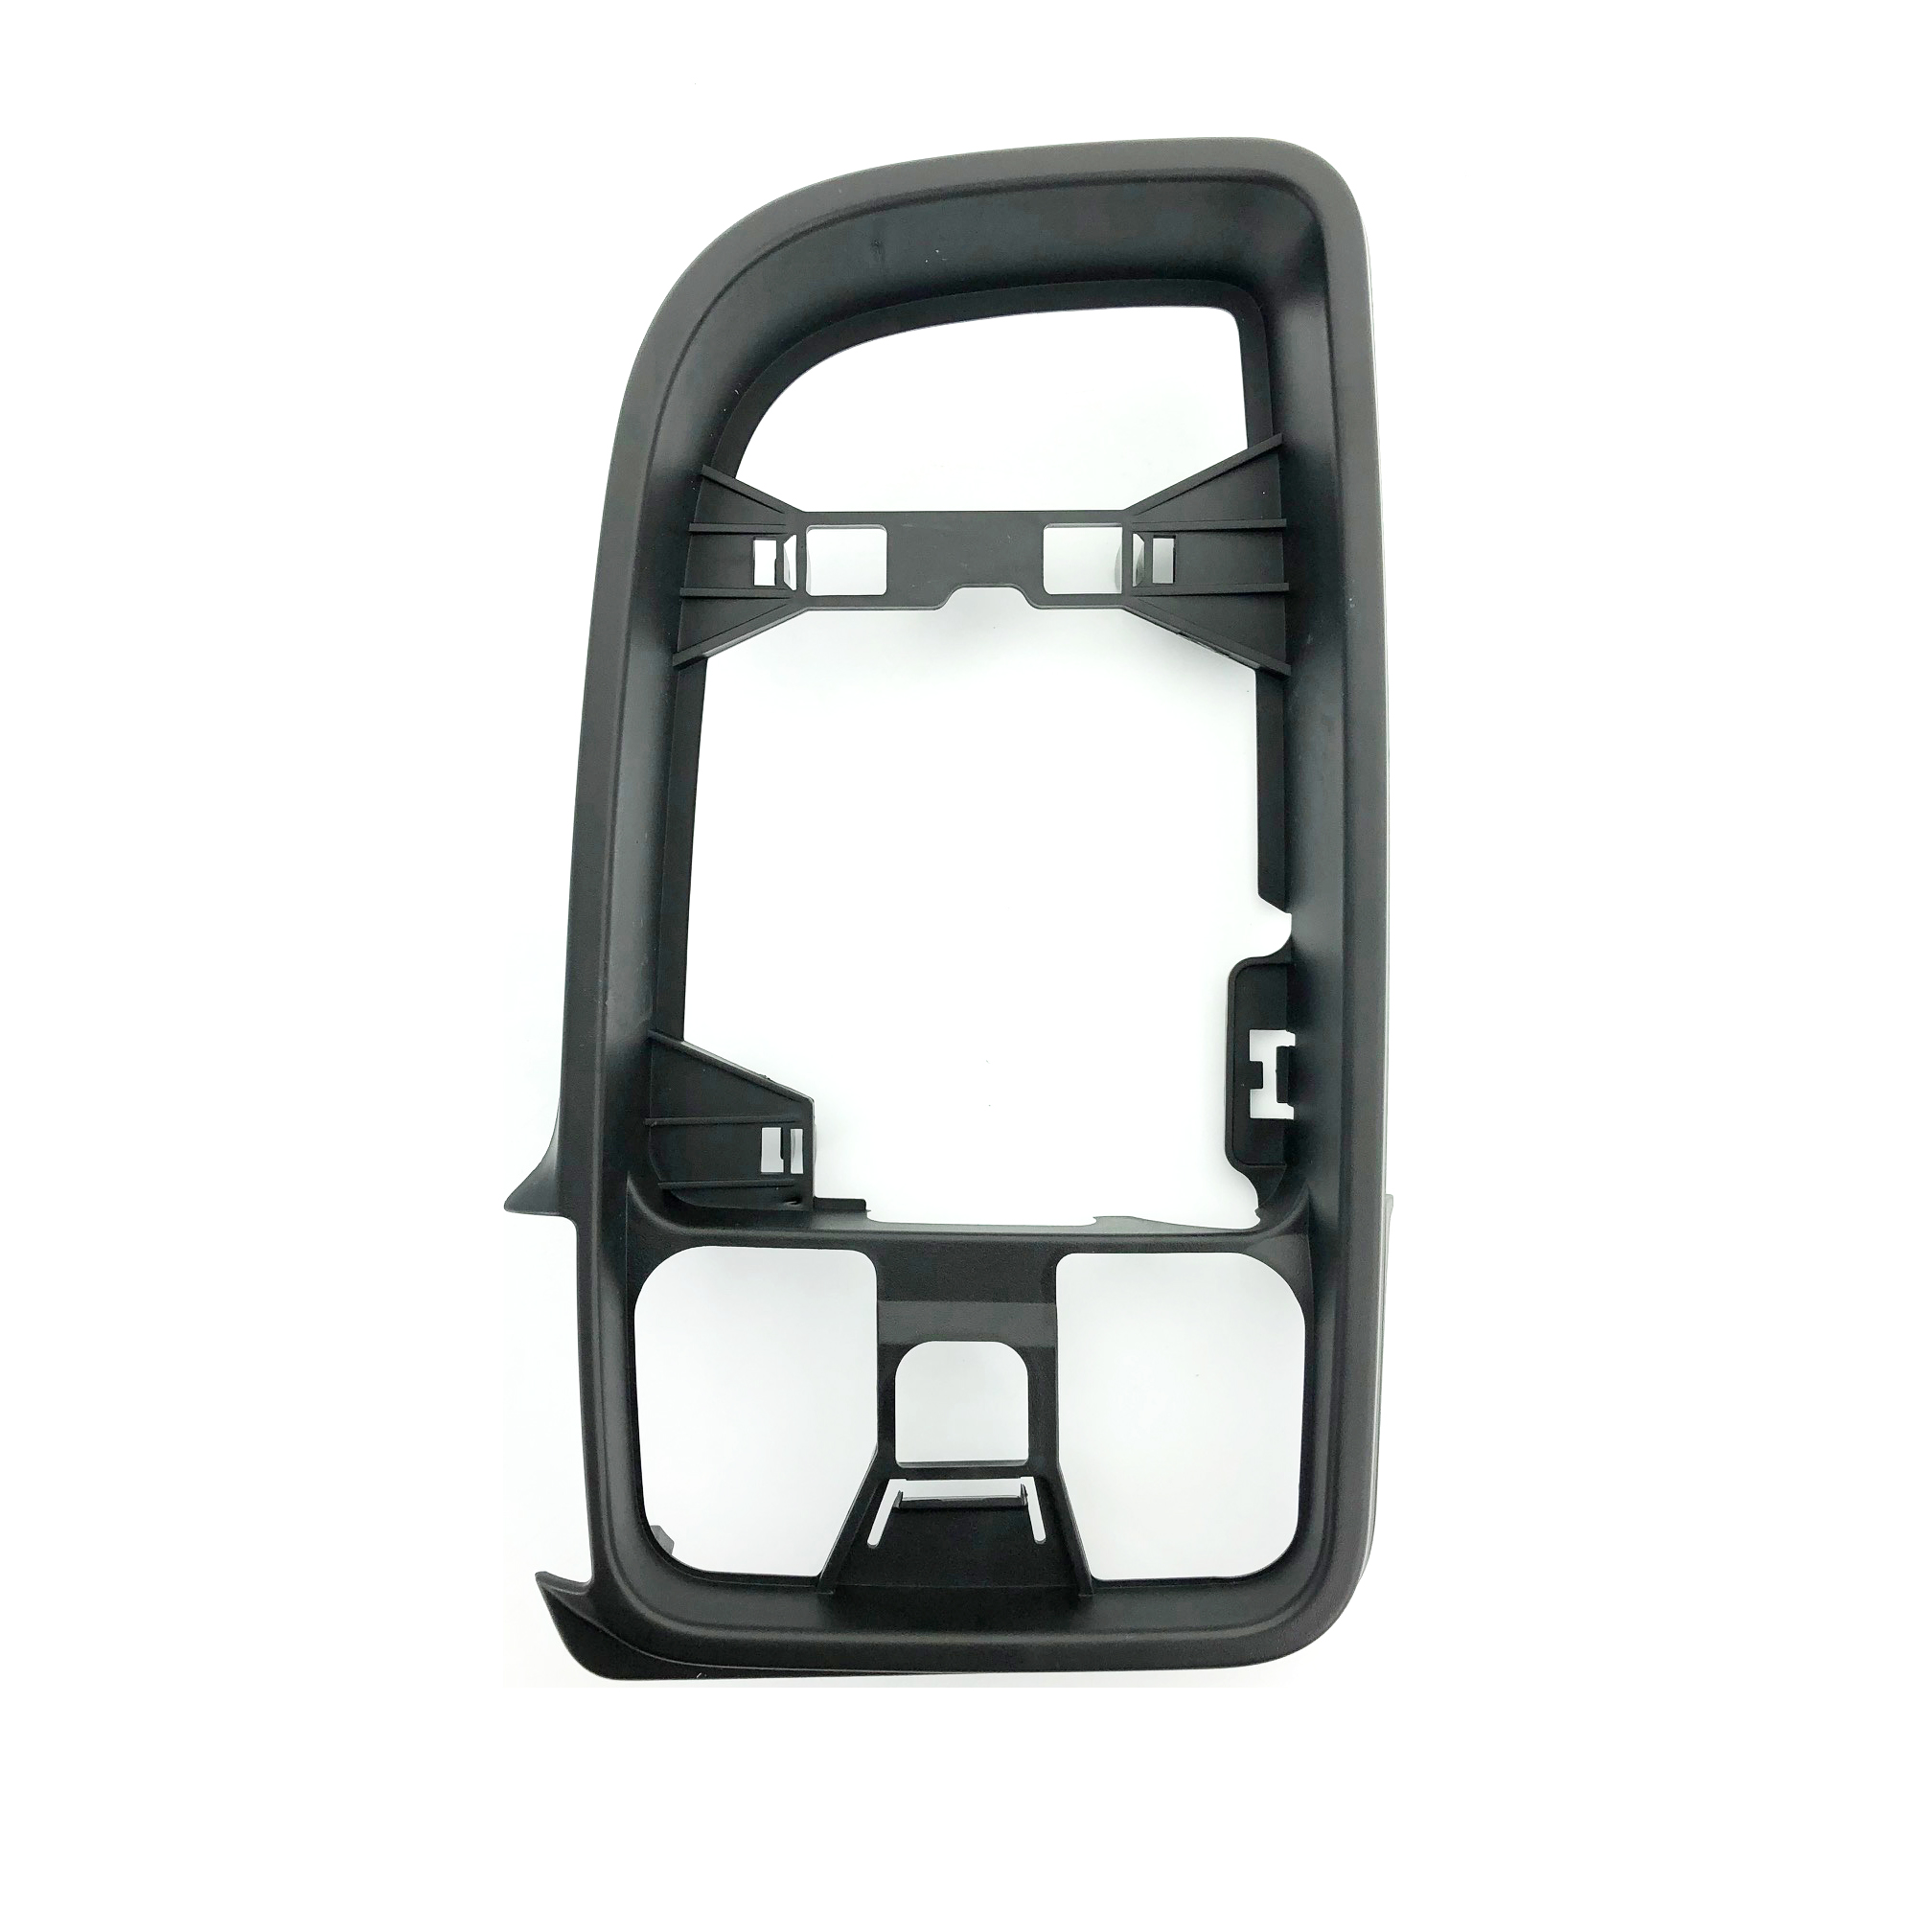 Mercedes Sprinter Wing Mirror Cover LEFT HAND ( UK Passenger Side ) 2012 to 2018 – Wing Mirror Cover FRAME